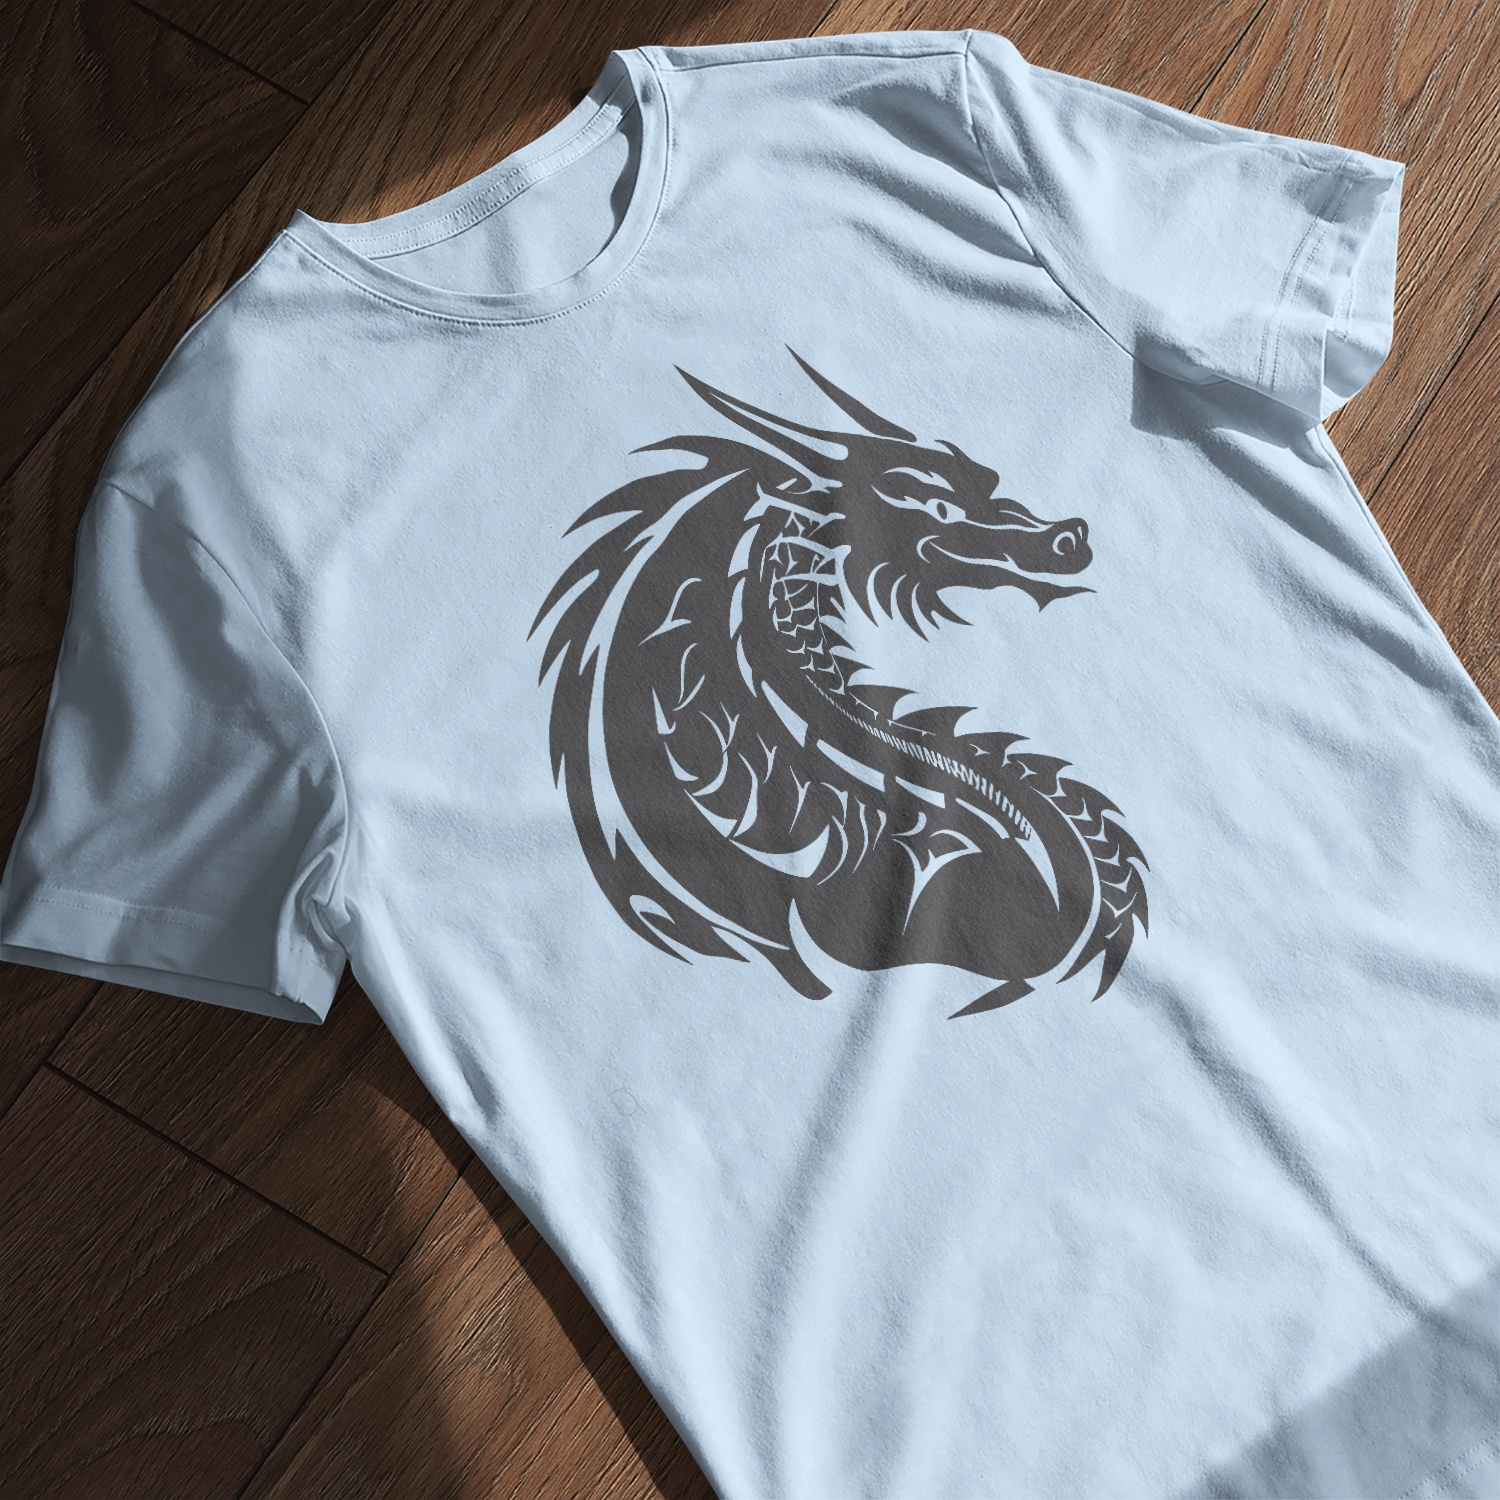 Dragon Fighter SVG File: Instant Download for Cricut, Silhouette